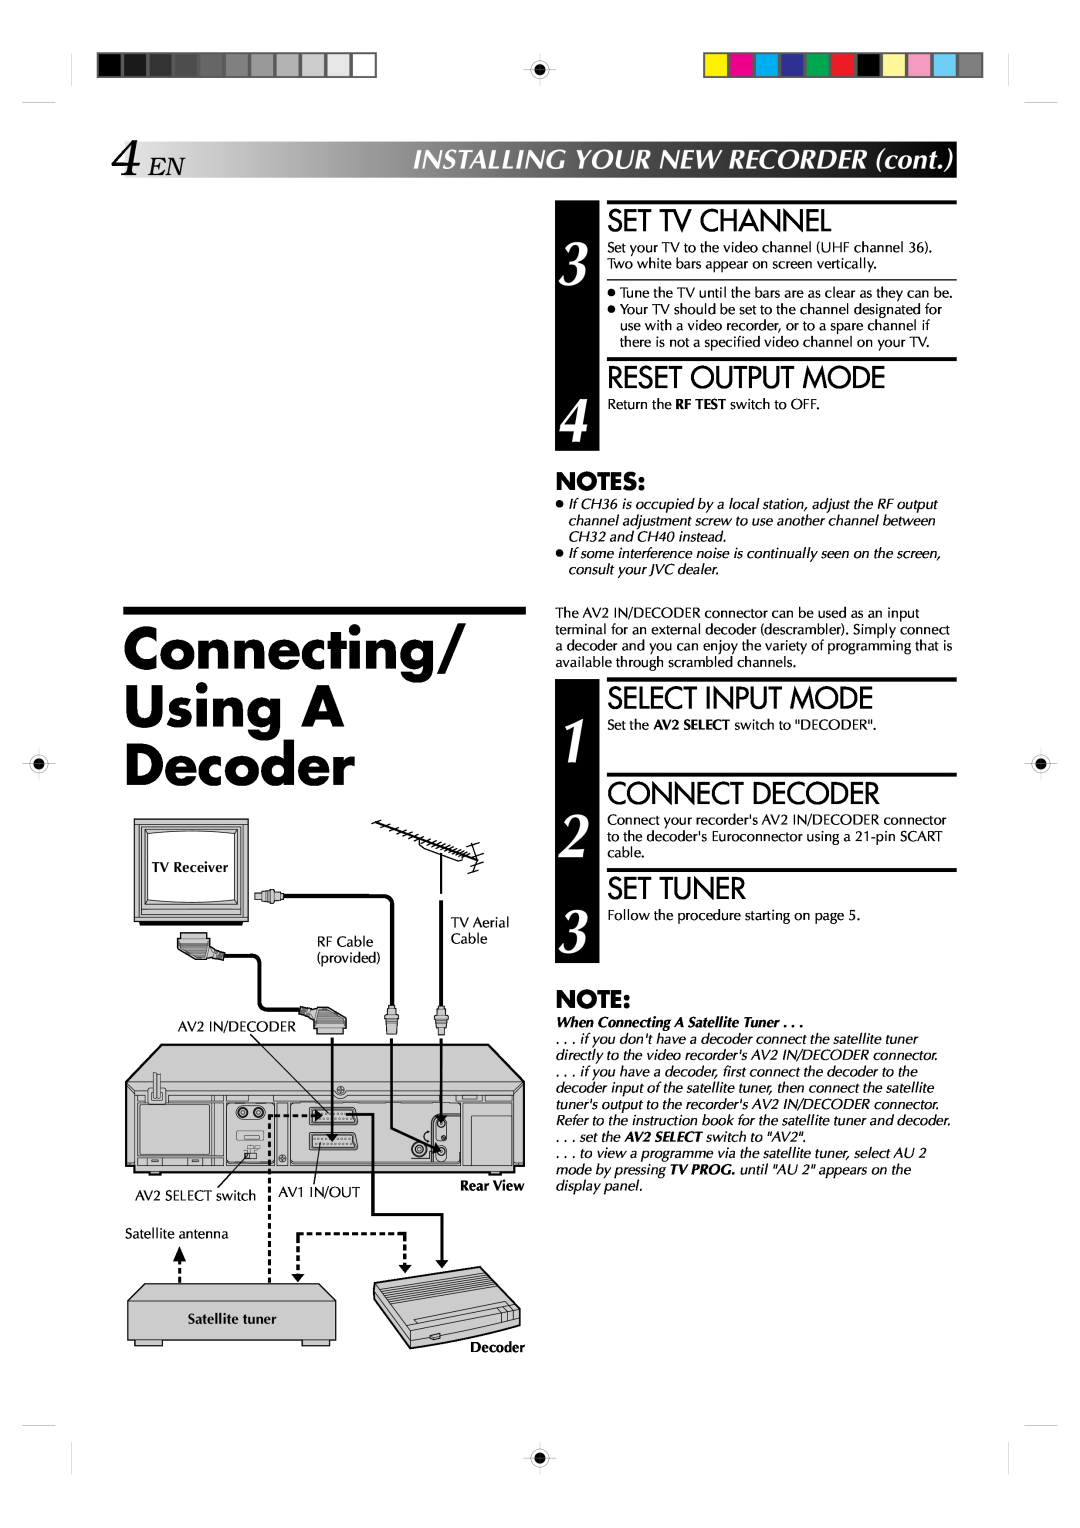 JVC HR-J638E/EH Connecting Using A Decoder, INSTALLINGYOURNEWRECORDER cont, TV Receiver, When Connecting A Satellite Tuner 